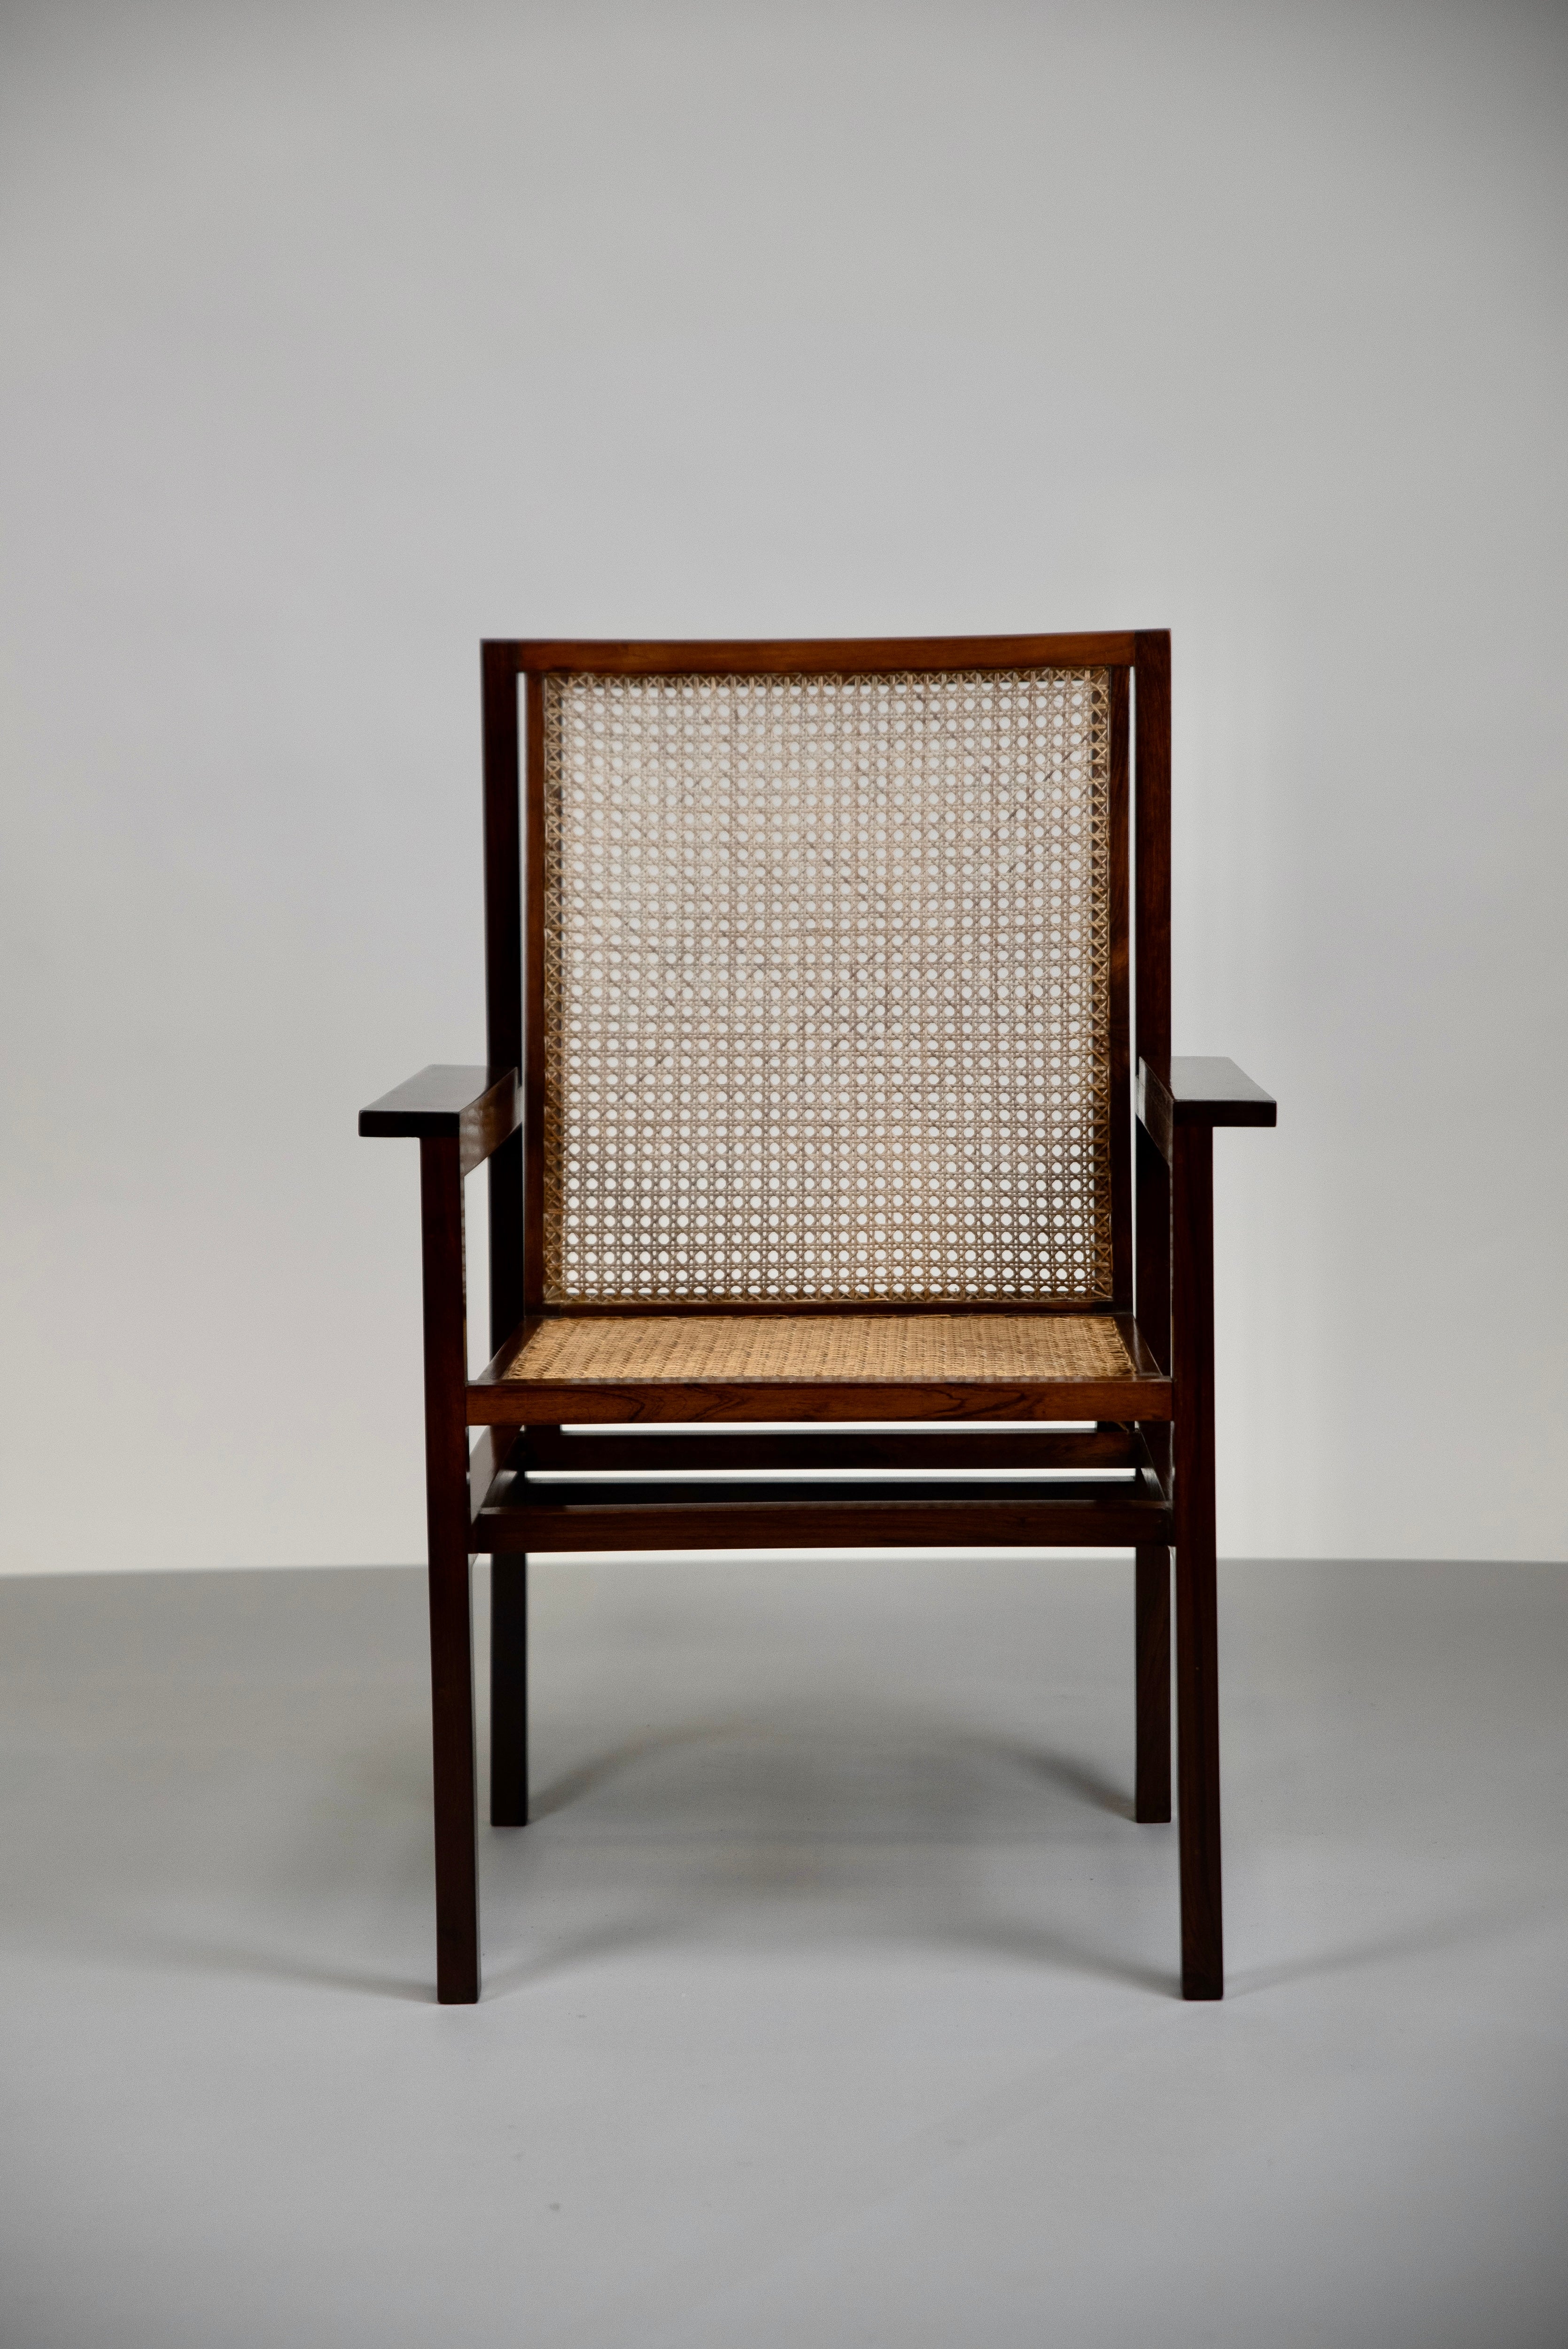 This armchair was designed around 1947 by Joaquim Tenreiro, the Brazilian master designer. It has typical Tenreiro characteristics. First of all, the use of this rare wood and cane, a combination that Tenreiro used very often not only because they